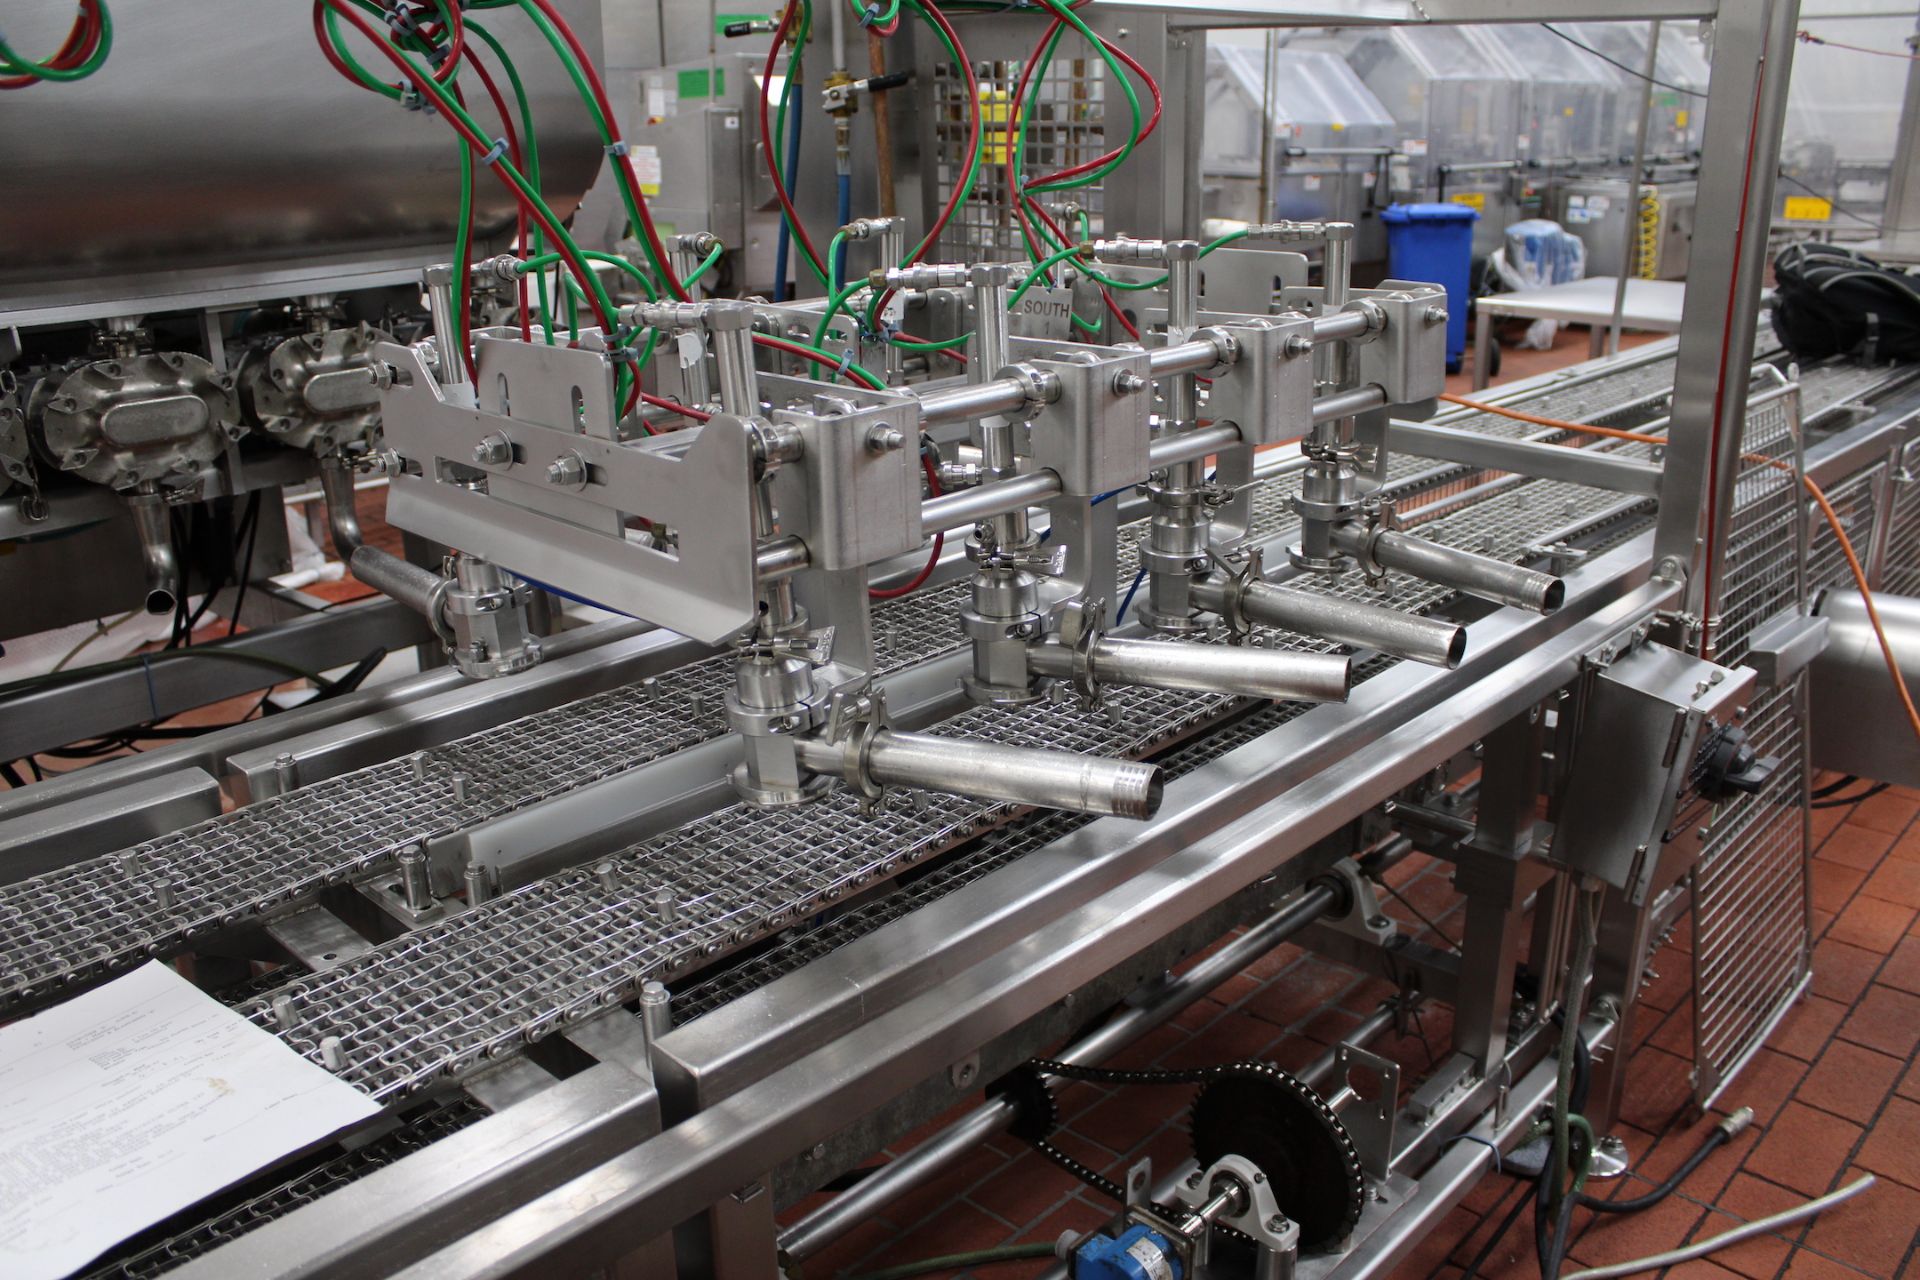 HINDSBOCK 4-WIDE SAUCE APPLICATOR / FILLER, EQUIPPED WITH SERVO DRIVEN AMPCO AND WAUKESHA CHERRY - Bild 11 aus 11